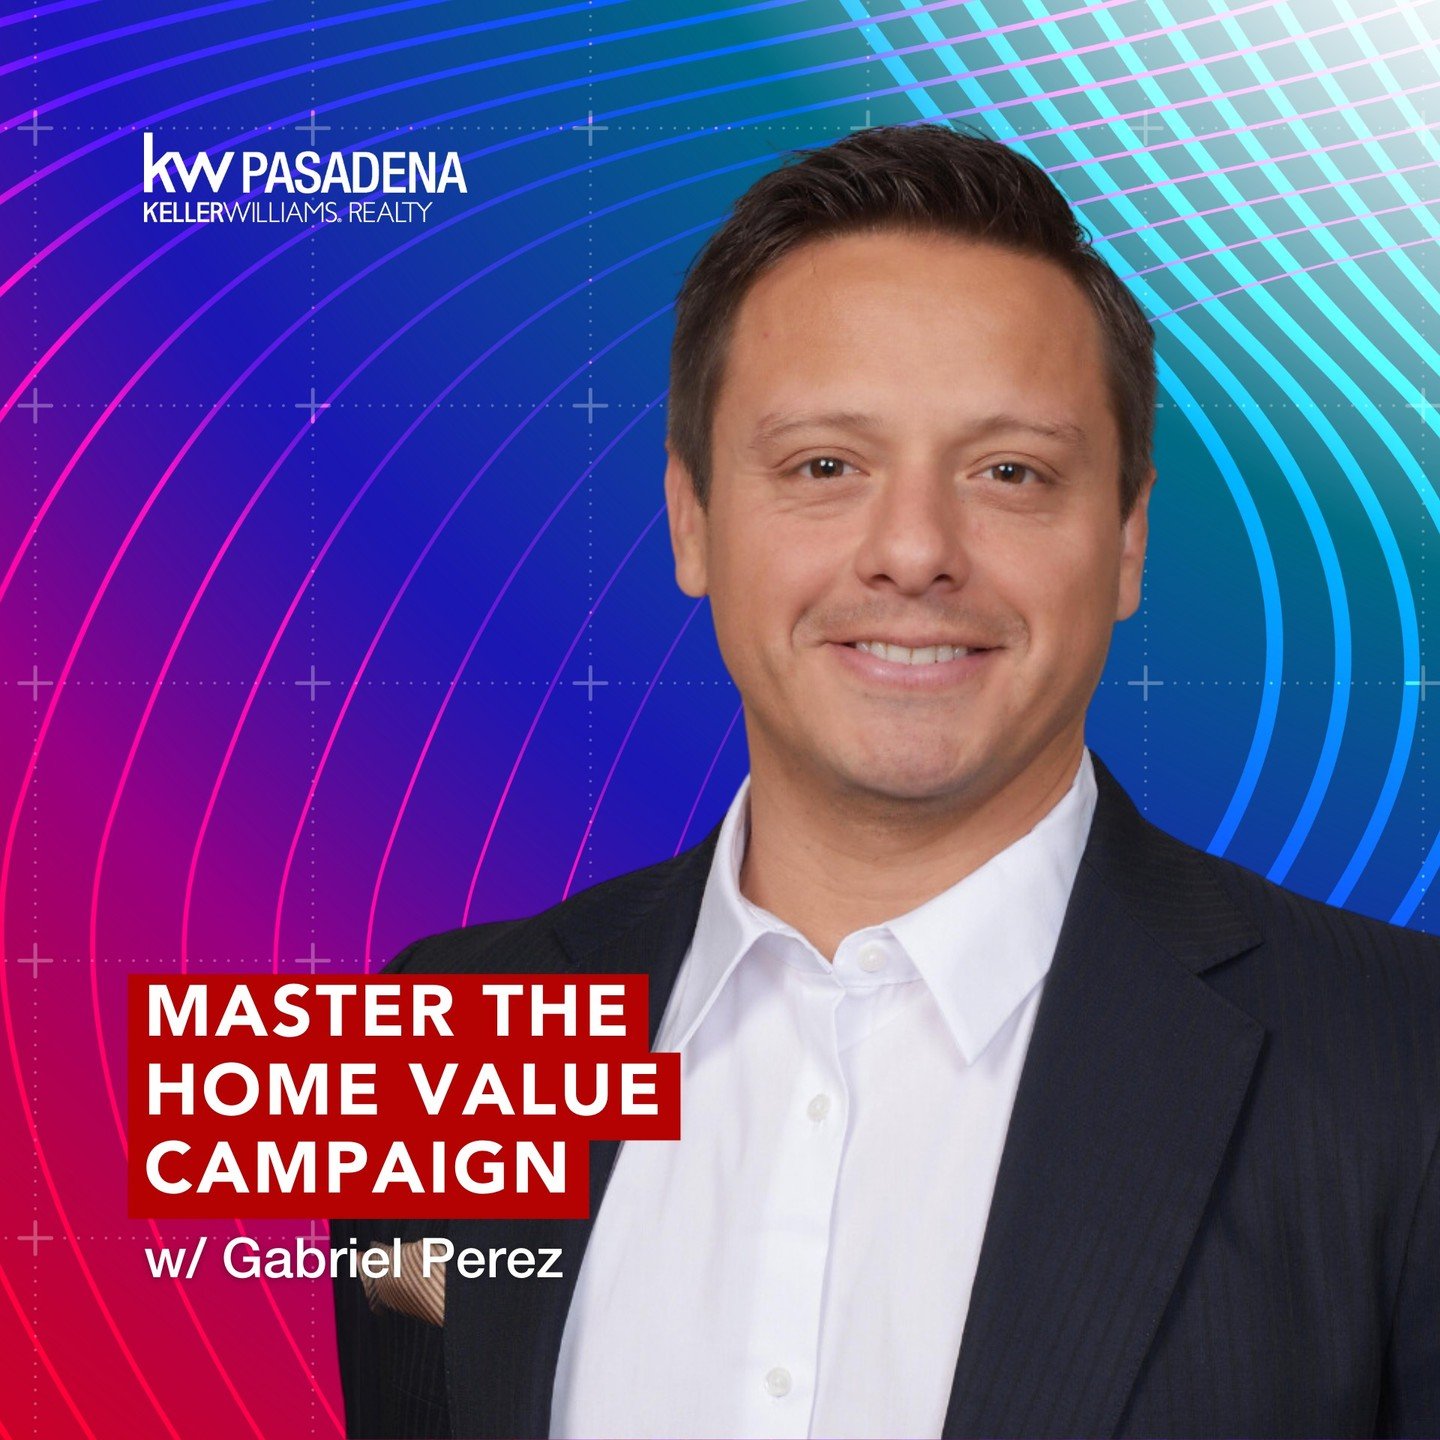 Get ready to boost your lead generation with our exclusive workshop, &quot;How to Master the Home Evaluation Campaign&quot;! Learn cutting-edge marketing strategies tailored for real estate, designed to attract more clients and increase your listings